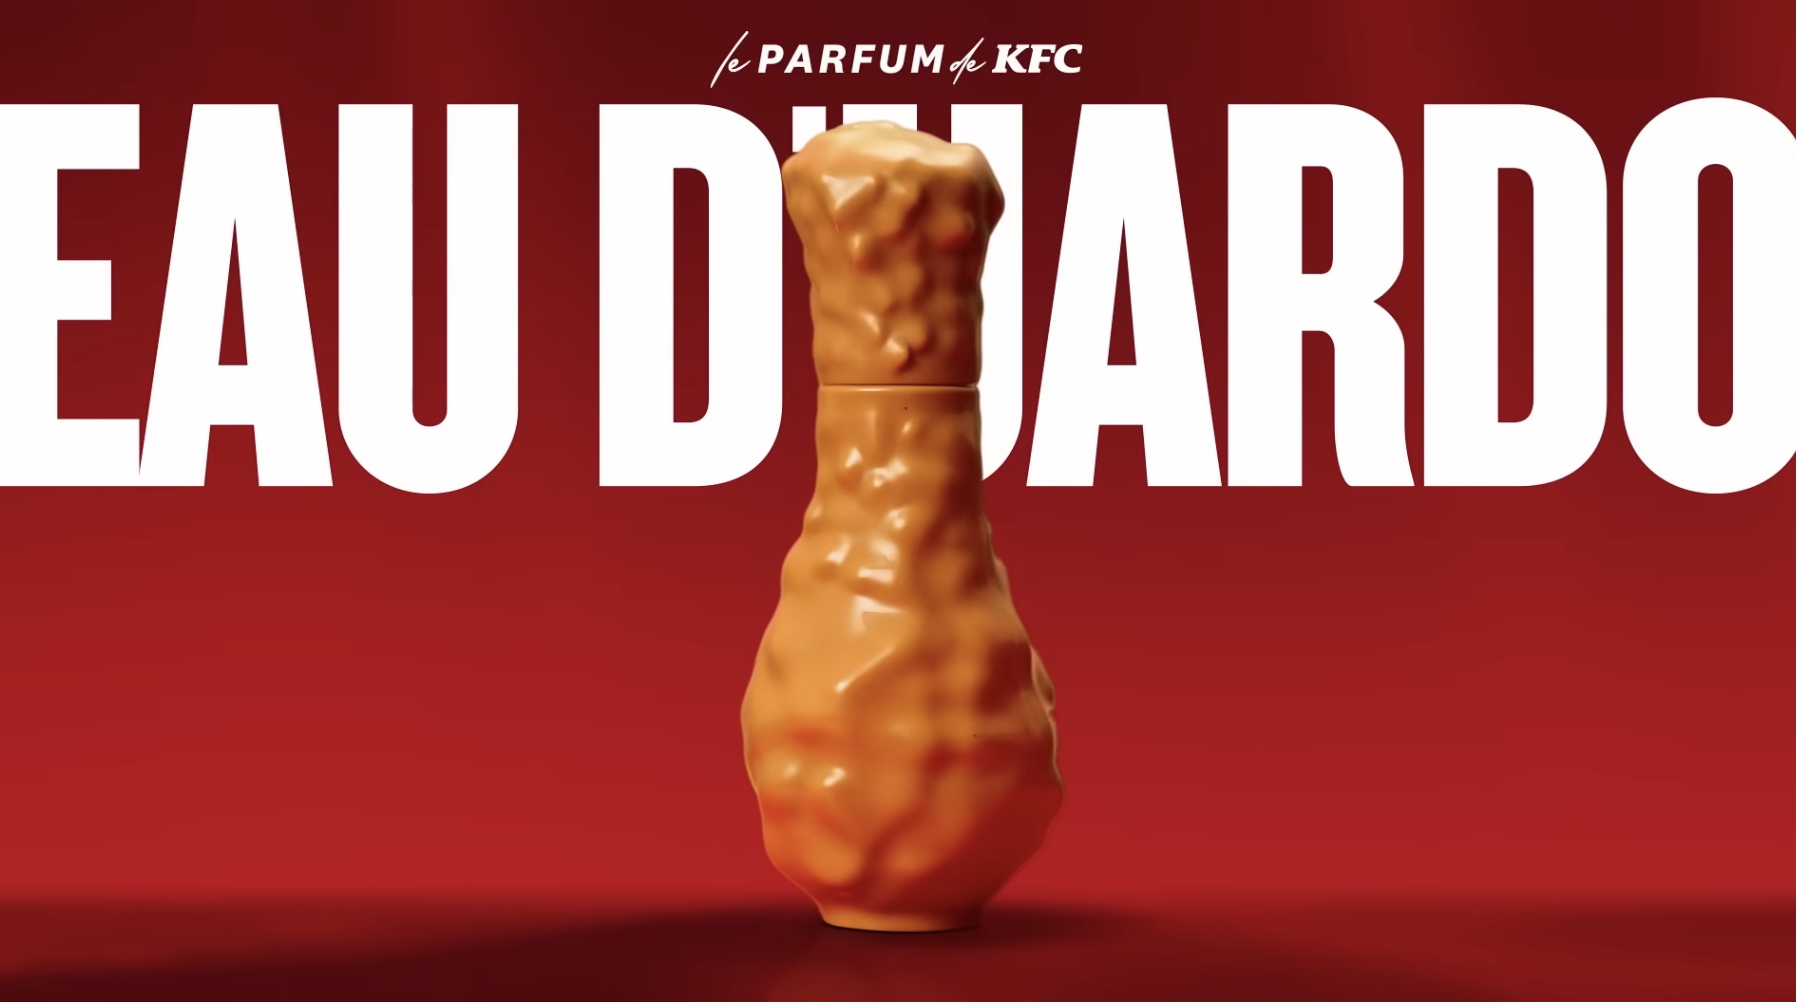 Want To Smell Like KFC? There’s a Fried Chicken Unisex Perfume for That